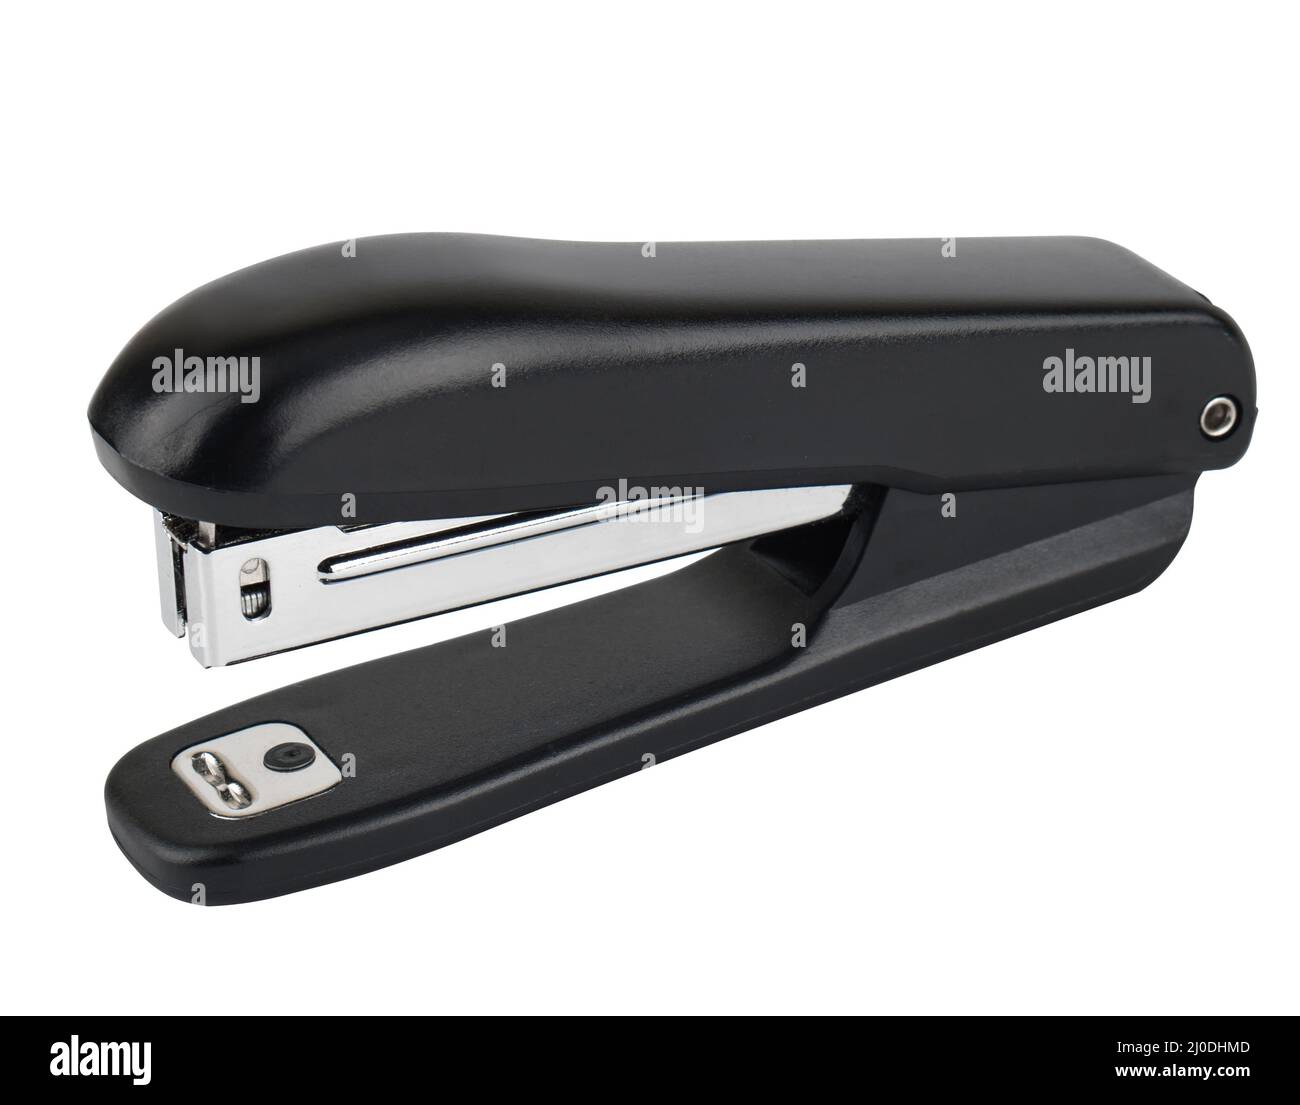 stapler for stapling paper on a white background in isolation Stock Photo